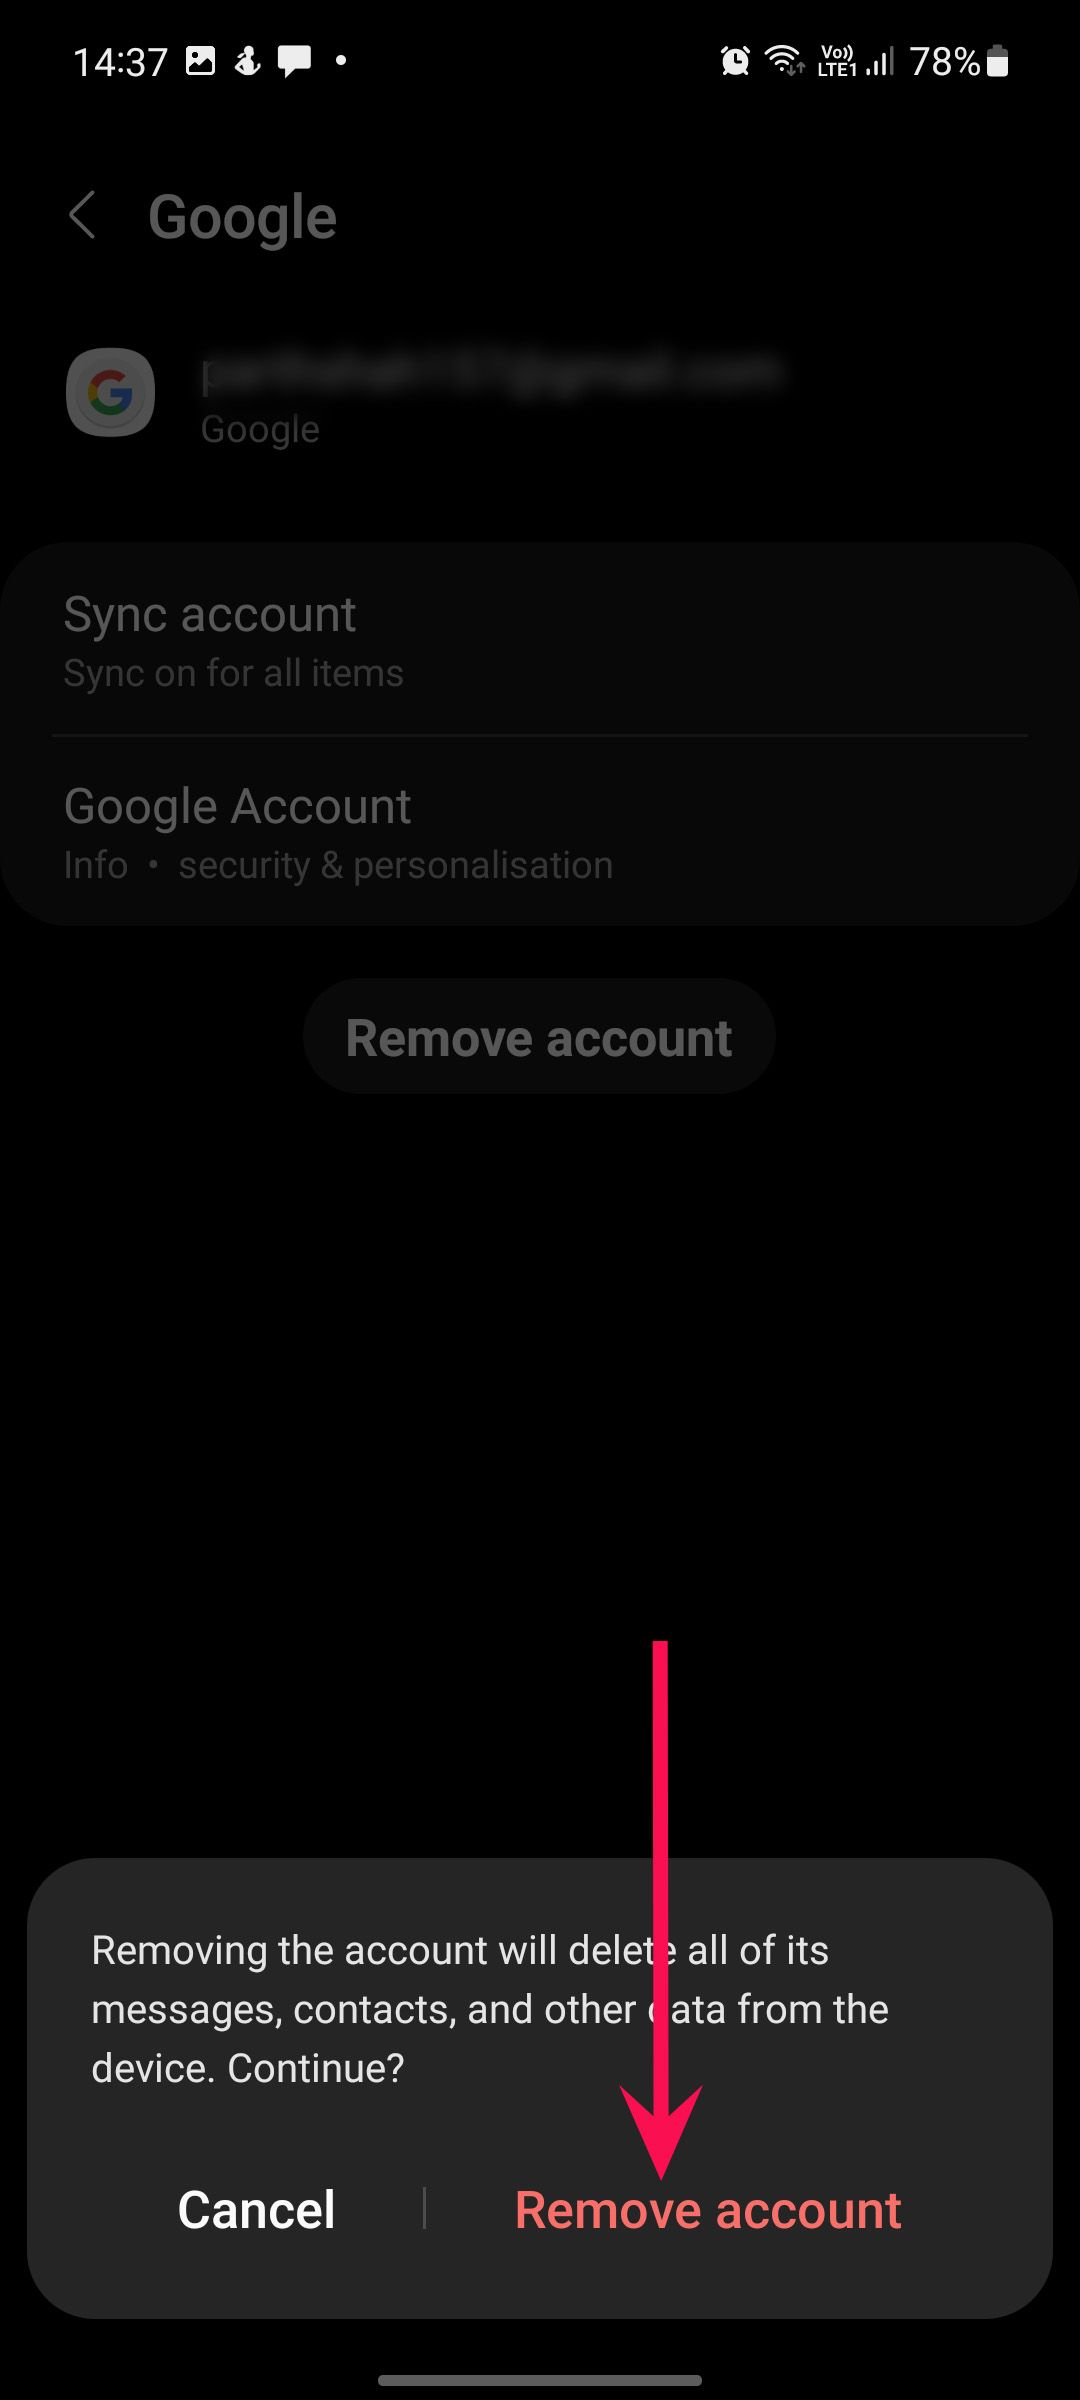 android phone screenshot showing remove account option in dark mode